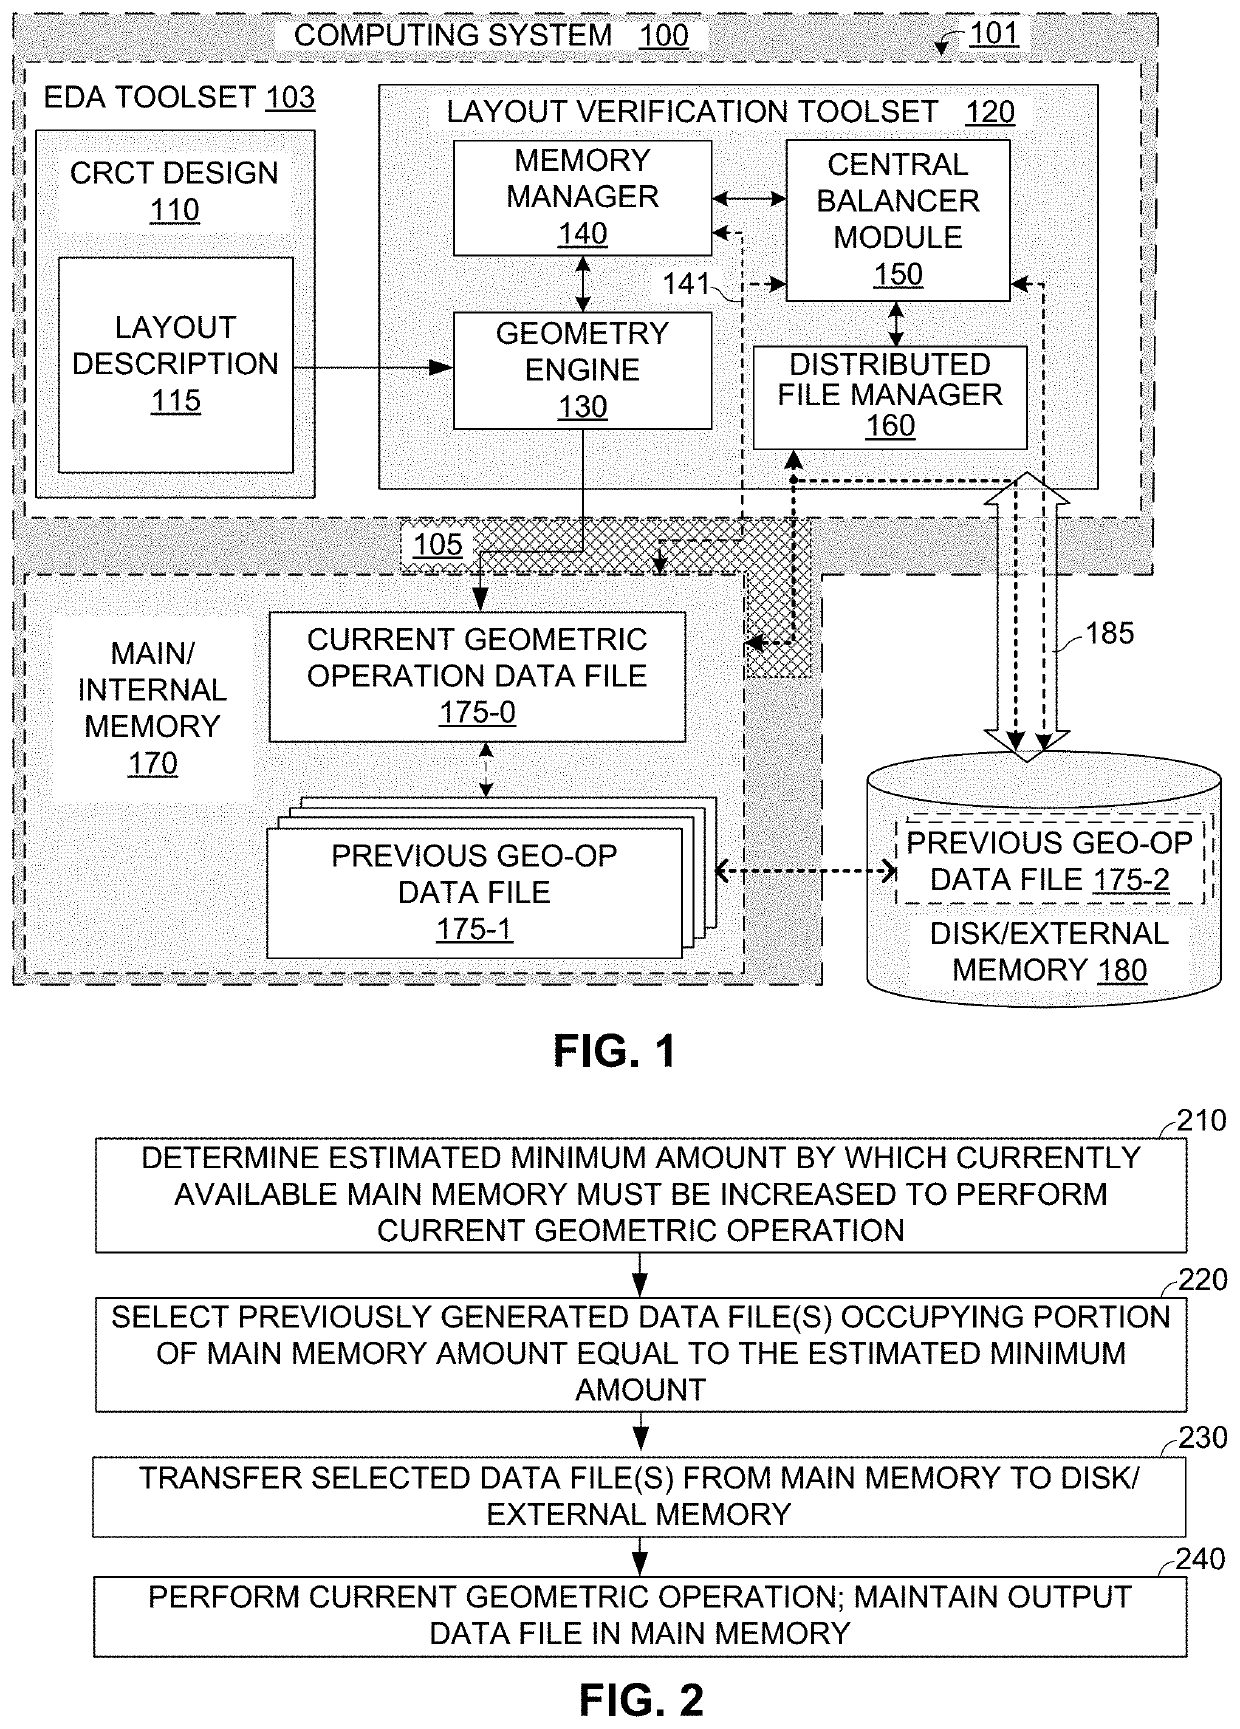 Priority aware balancing of memory usage between geometry operation and file storage